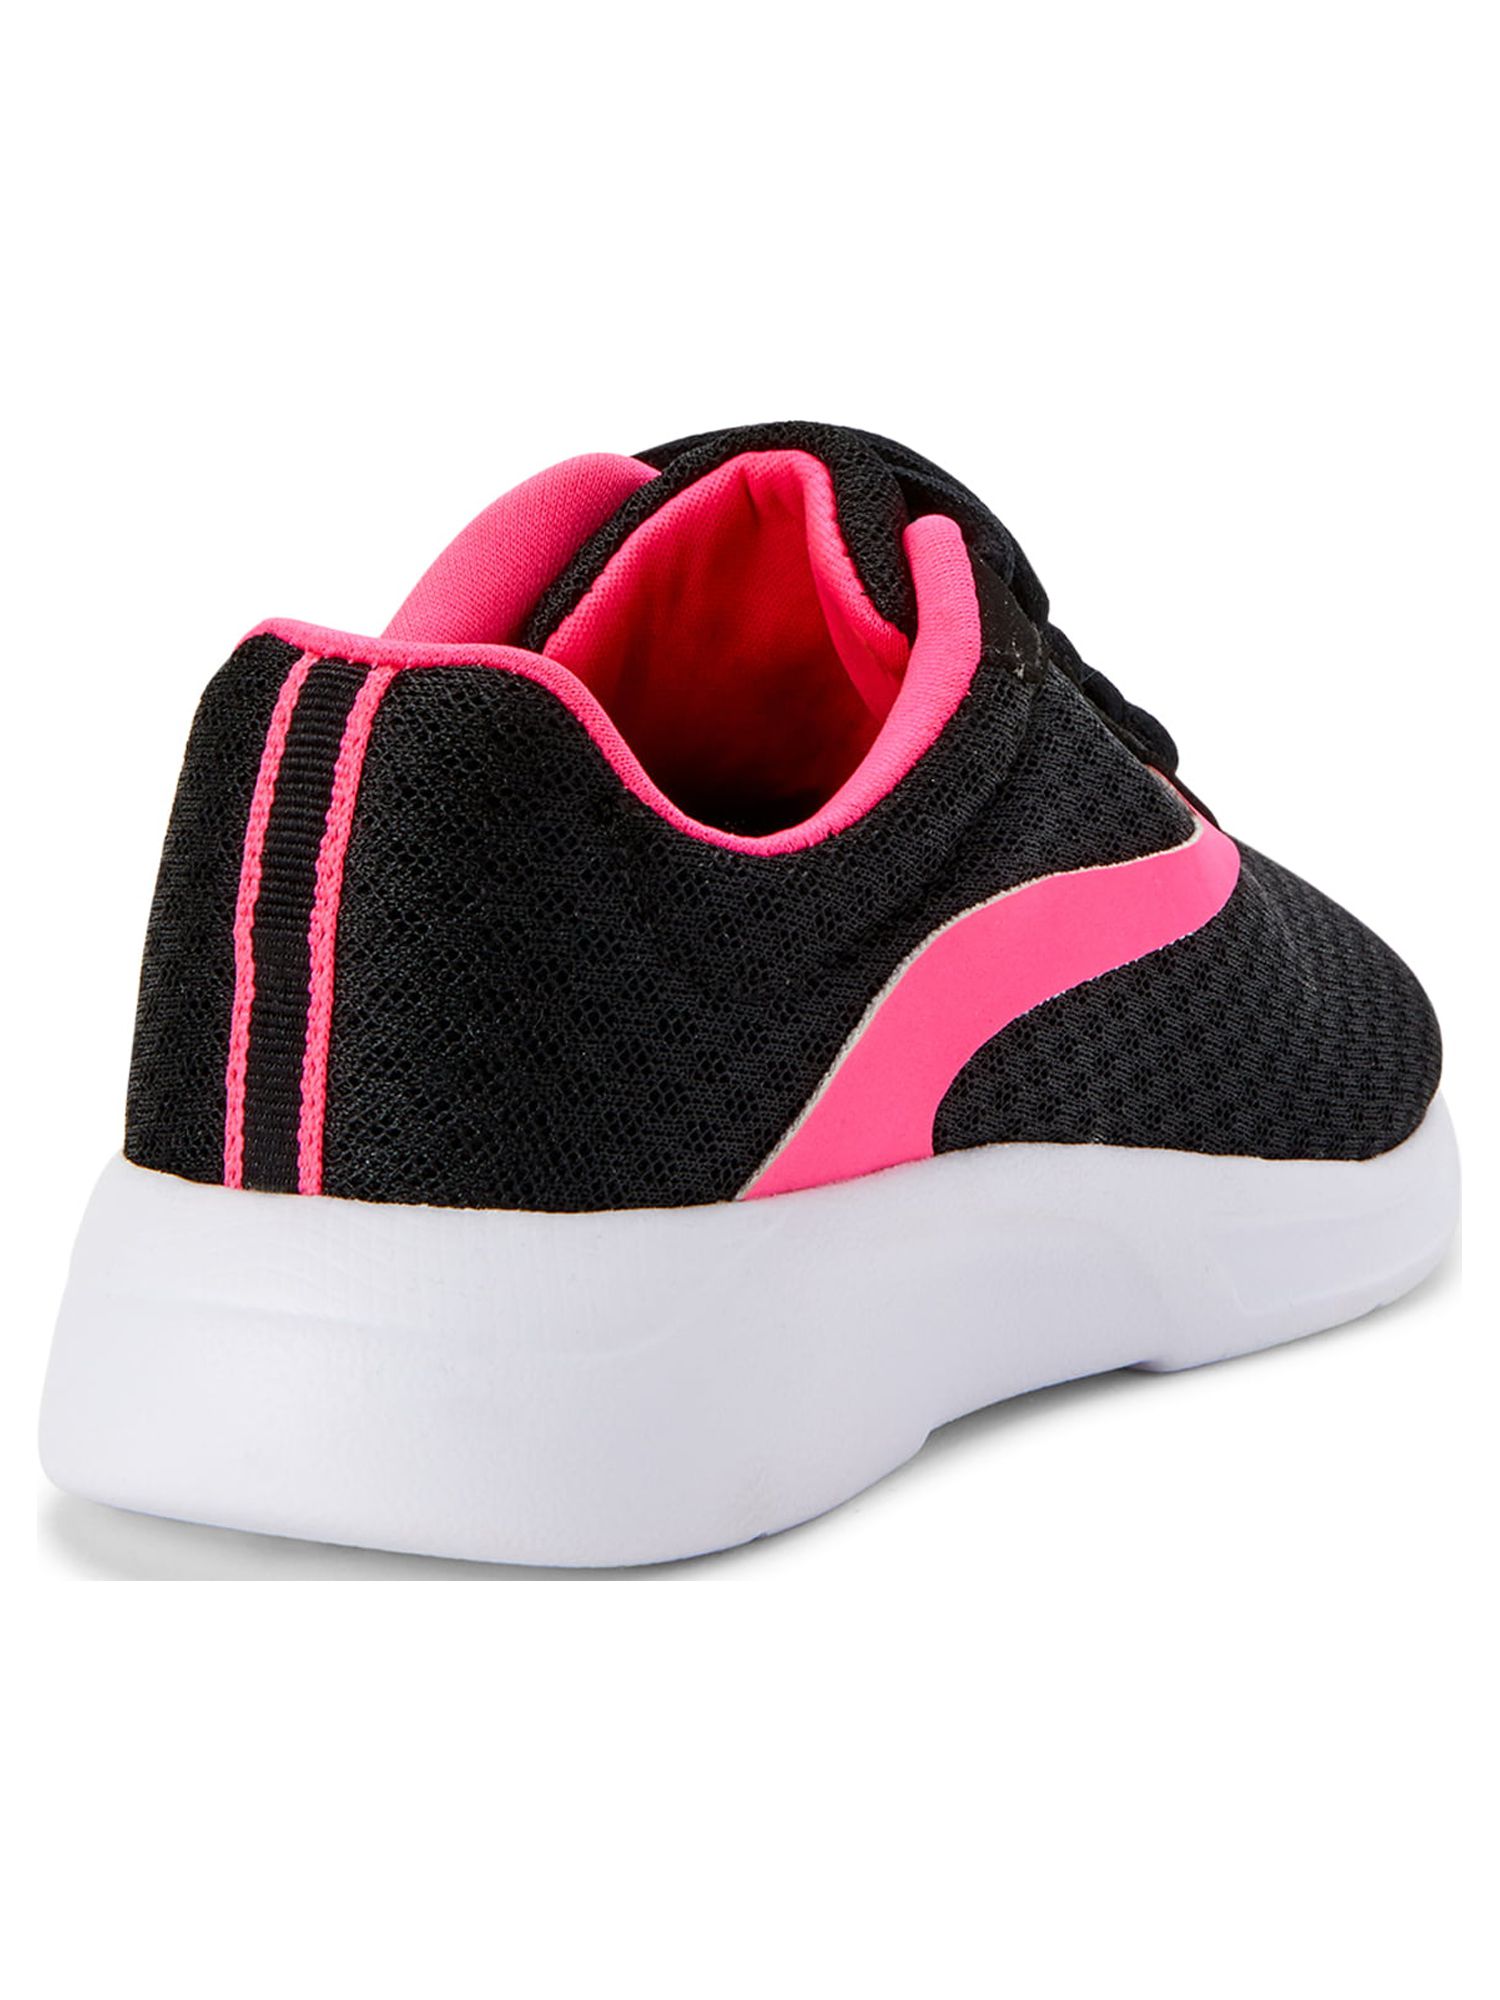 Athletic Works Little Girl & Big Girl Everyday Mesh Lace-Up Athletic Sneaker - image 5 of 7